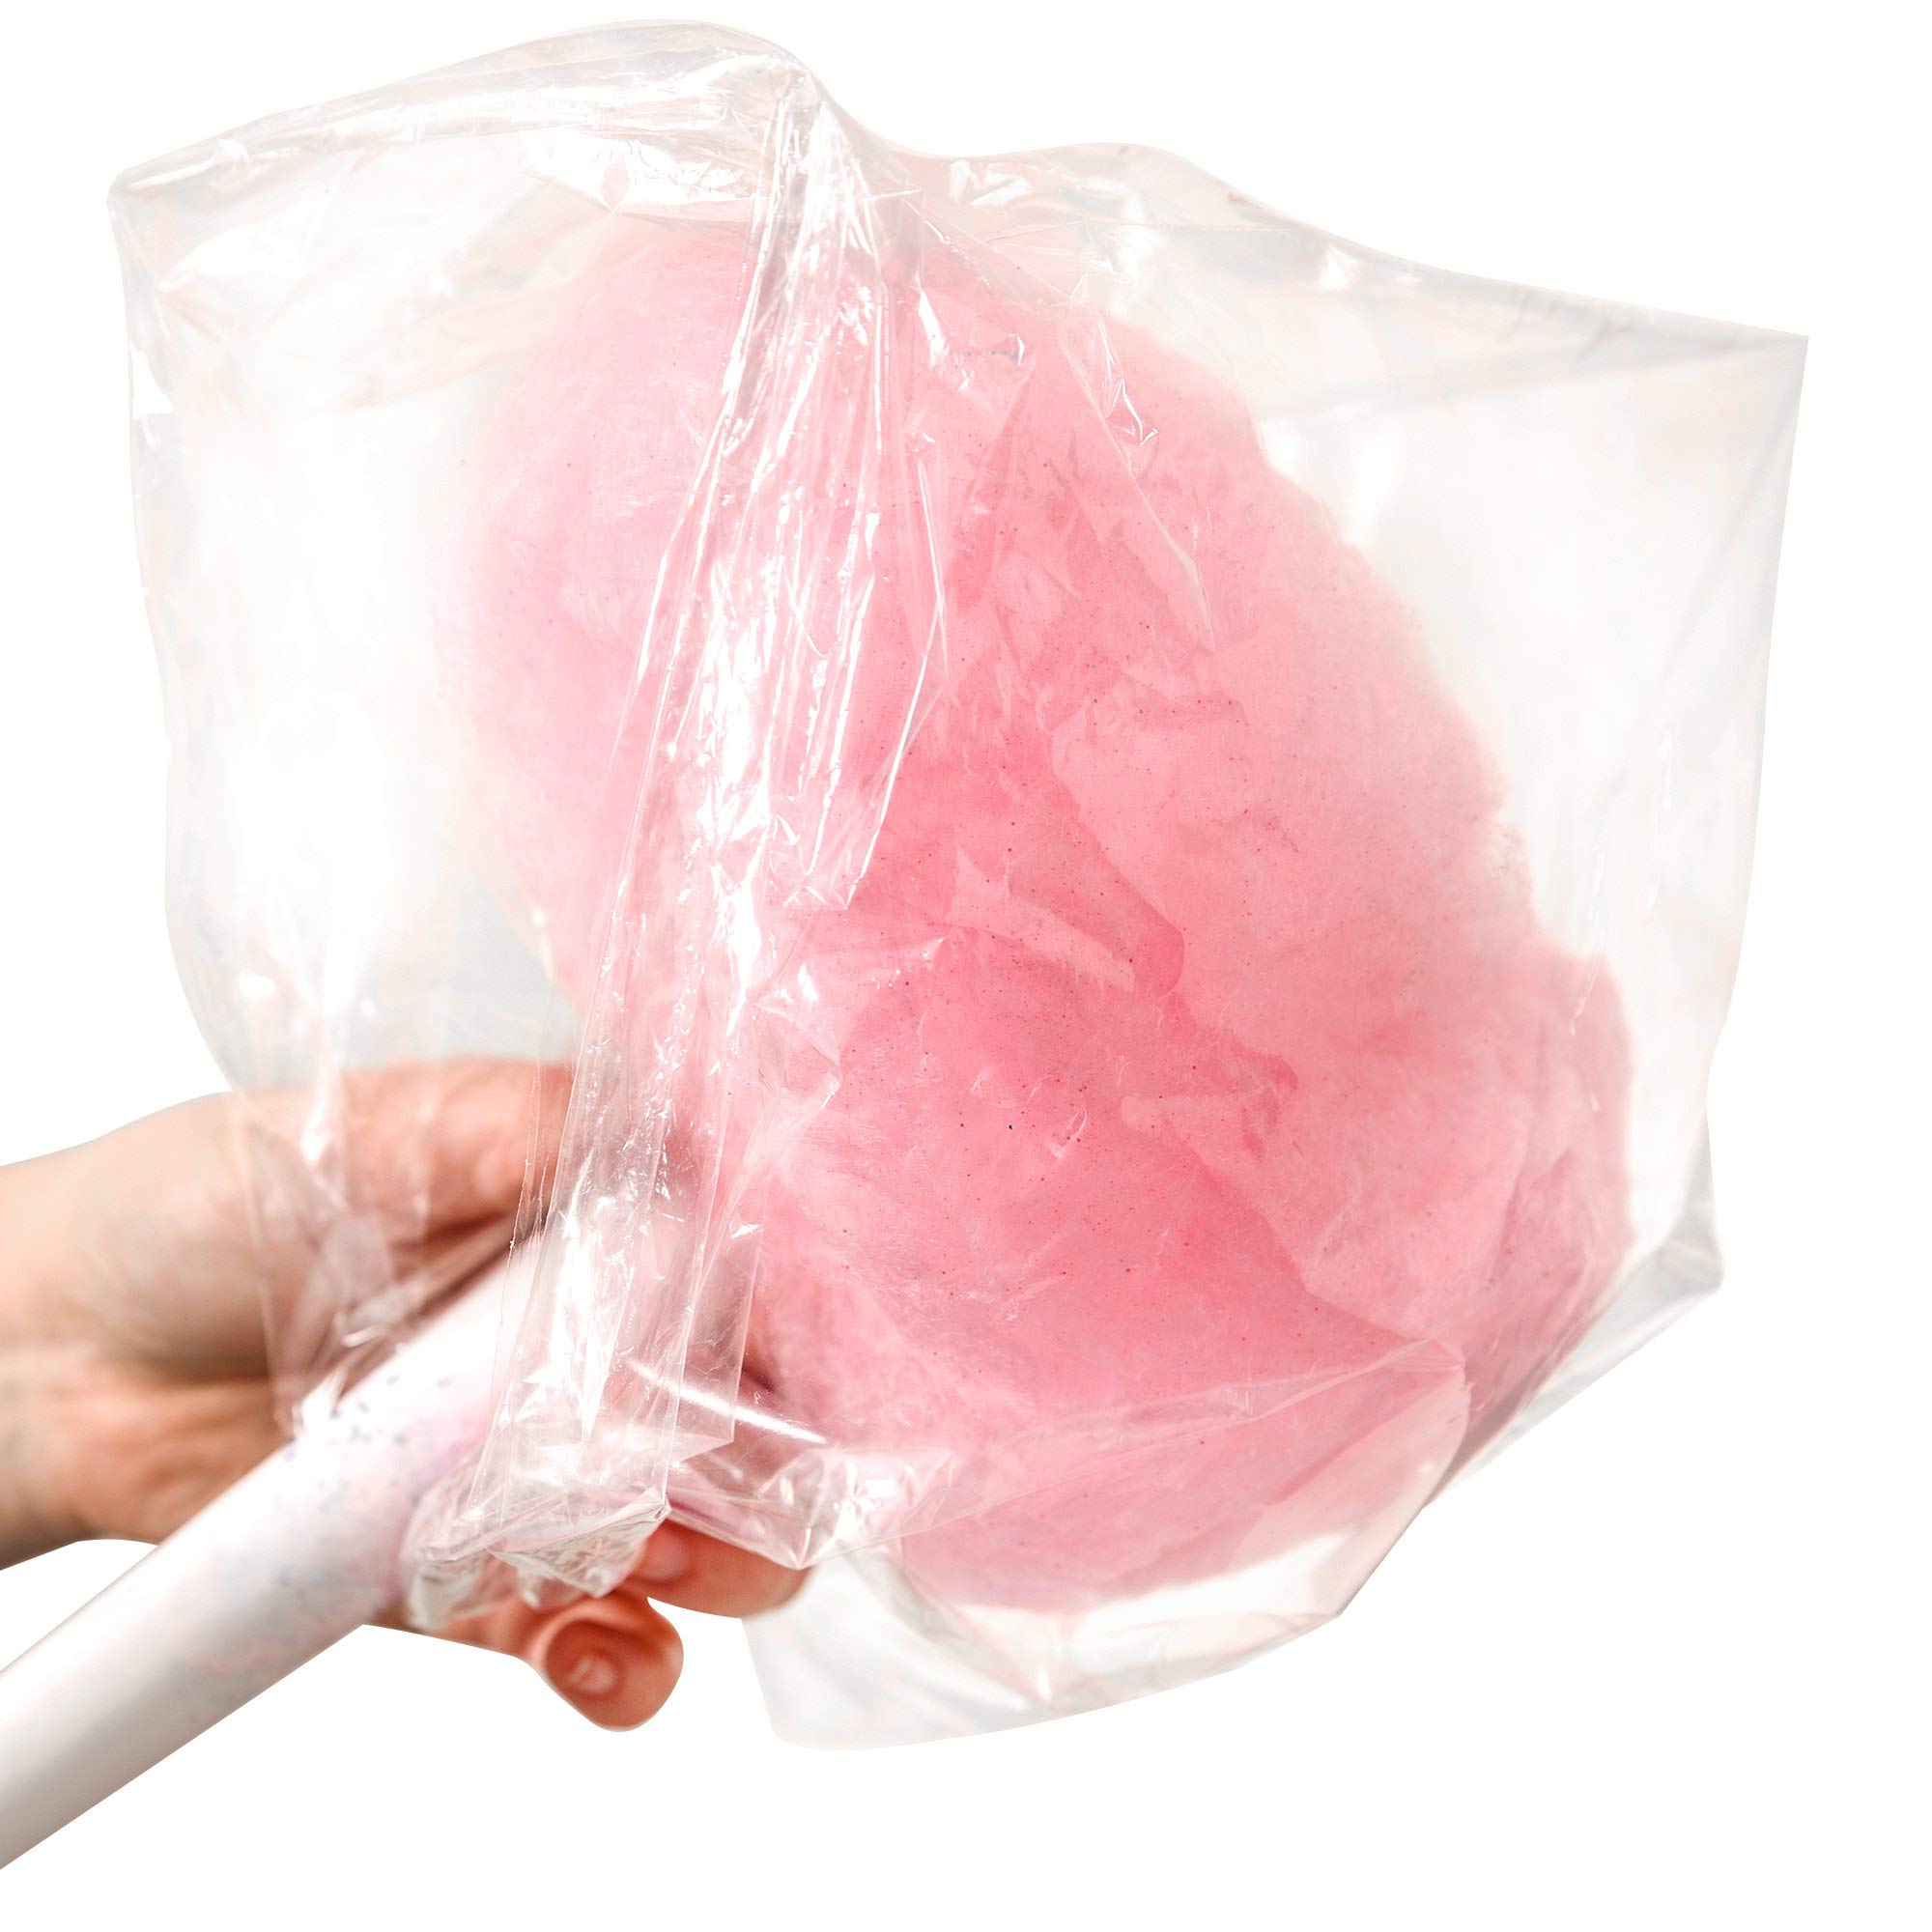 Concession Essentials - CE Floss Sugar -2pk Cotton Candy Floss Sugar 2 Pack (Pink Vanilla and Blue Raspberry)